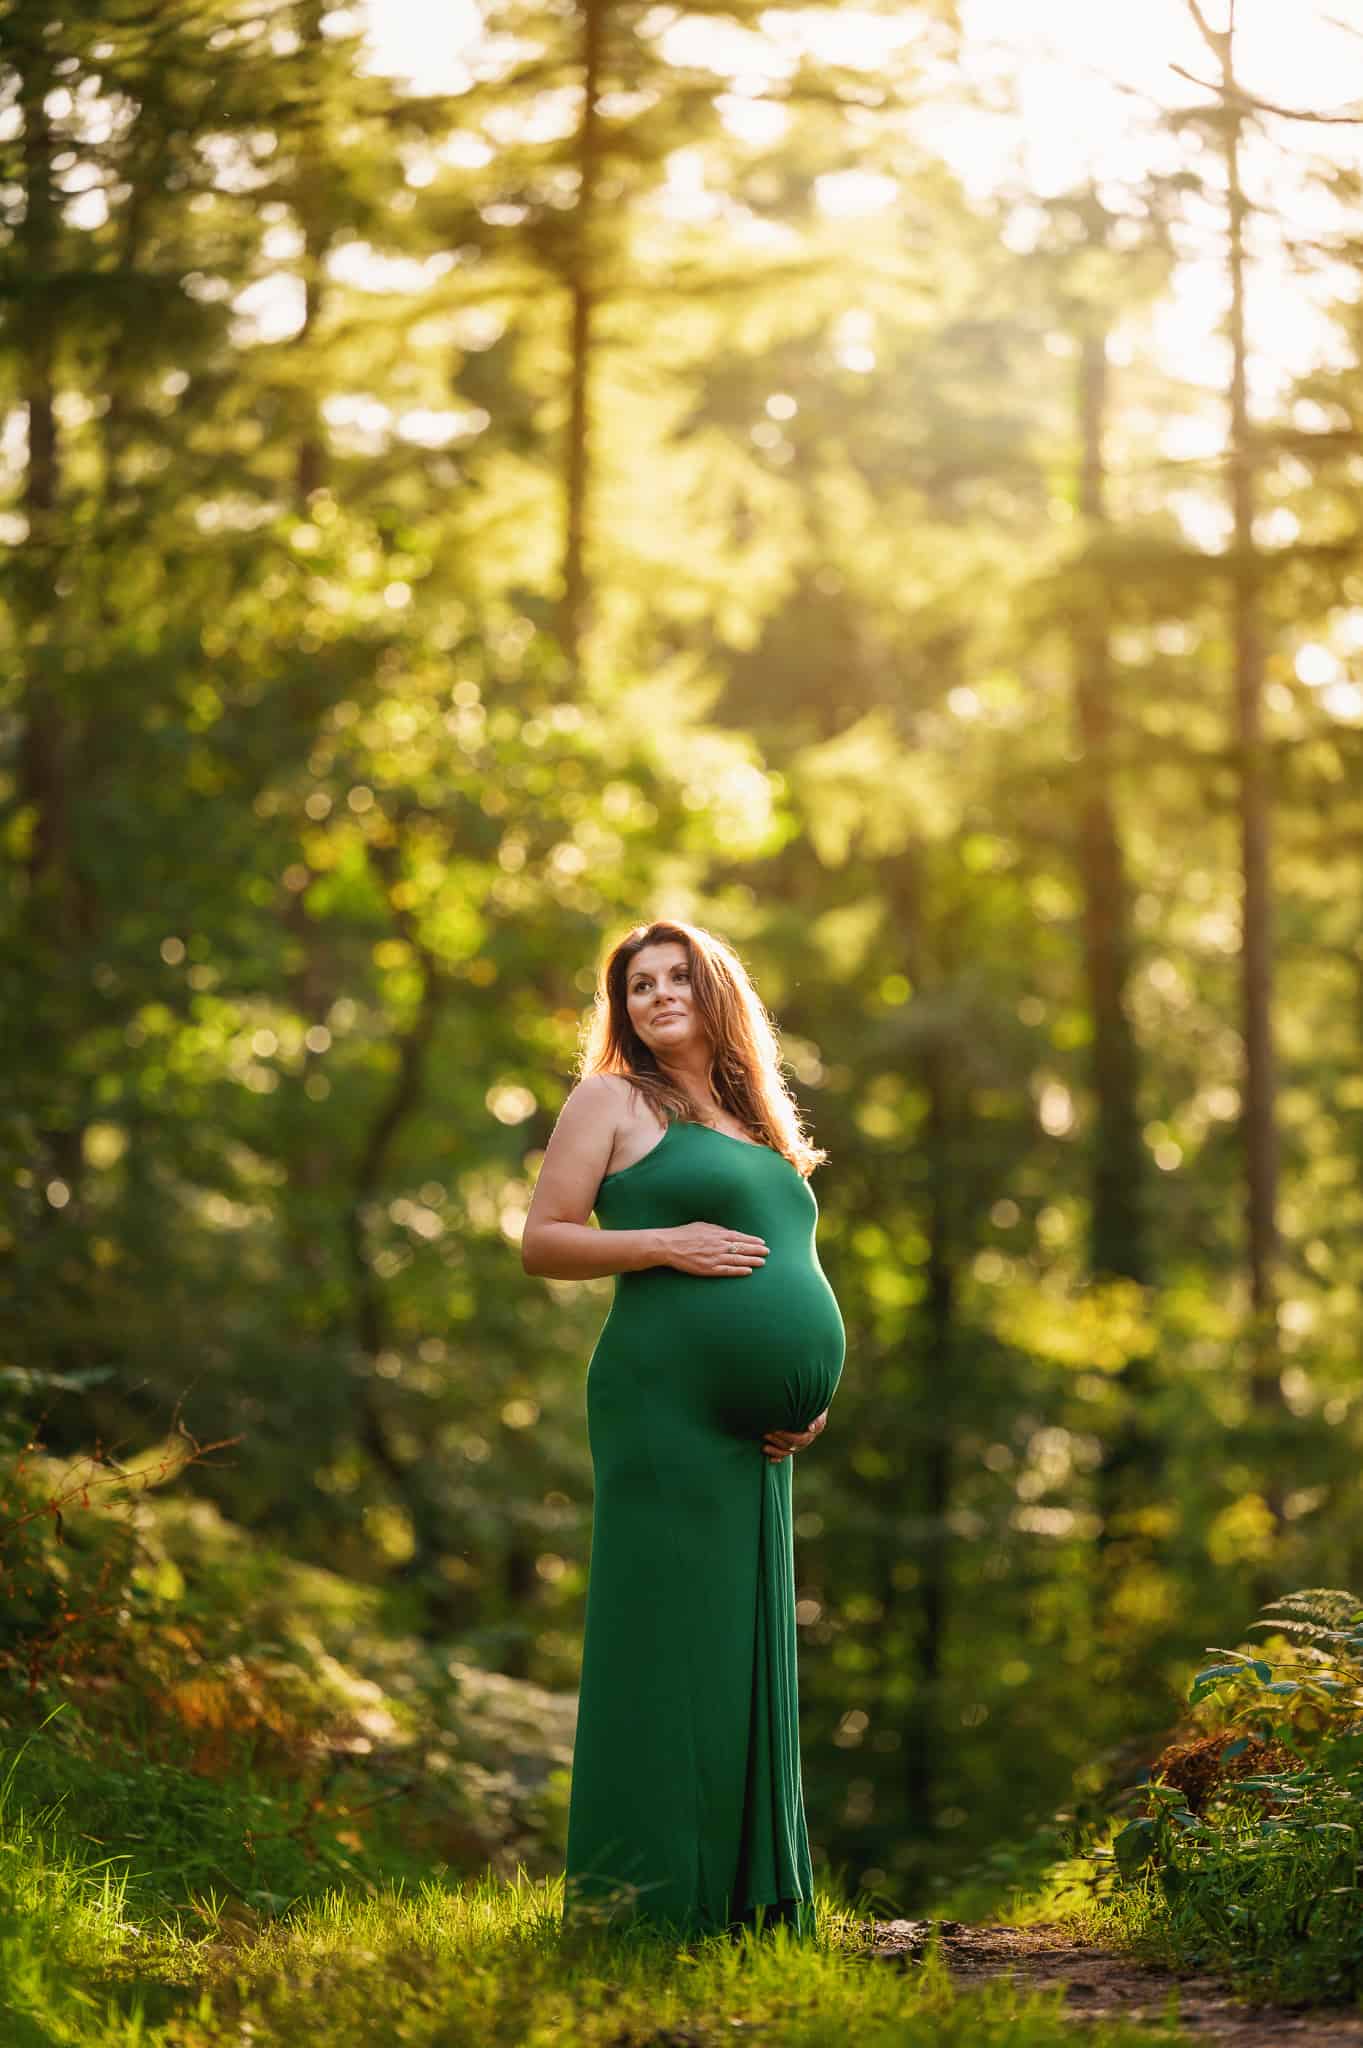 Maternity photo of lady wearing a green dress in a pine forest